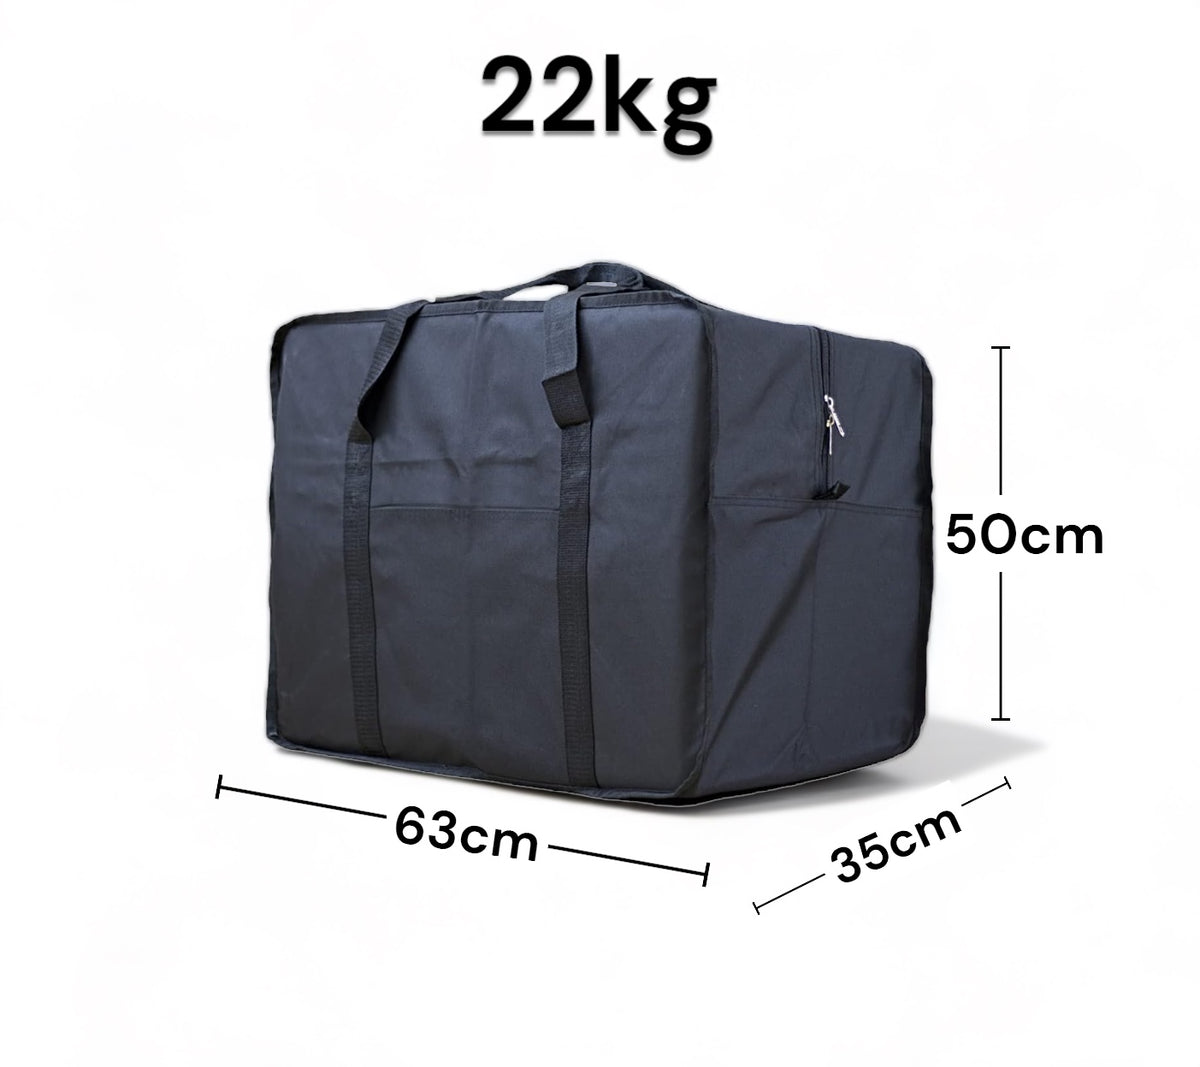 Travel Duffle Bags for 50lbs Available in Black